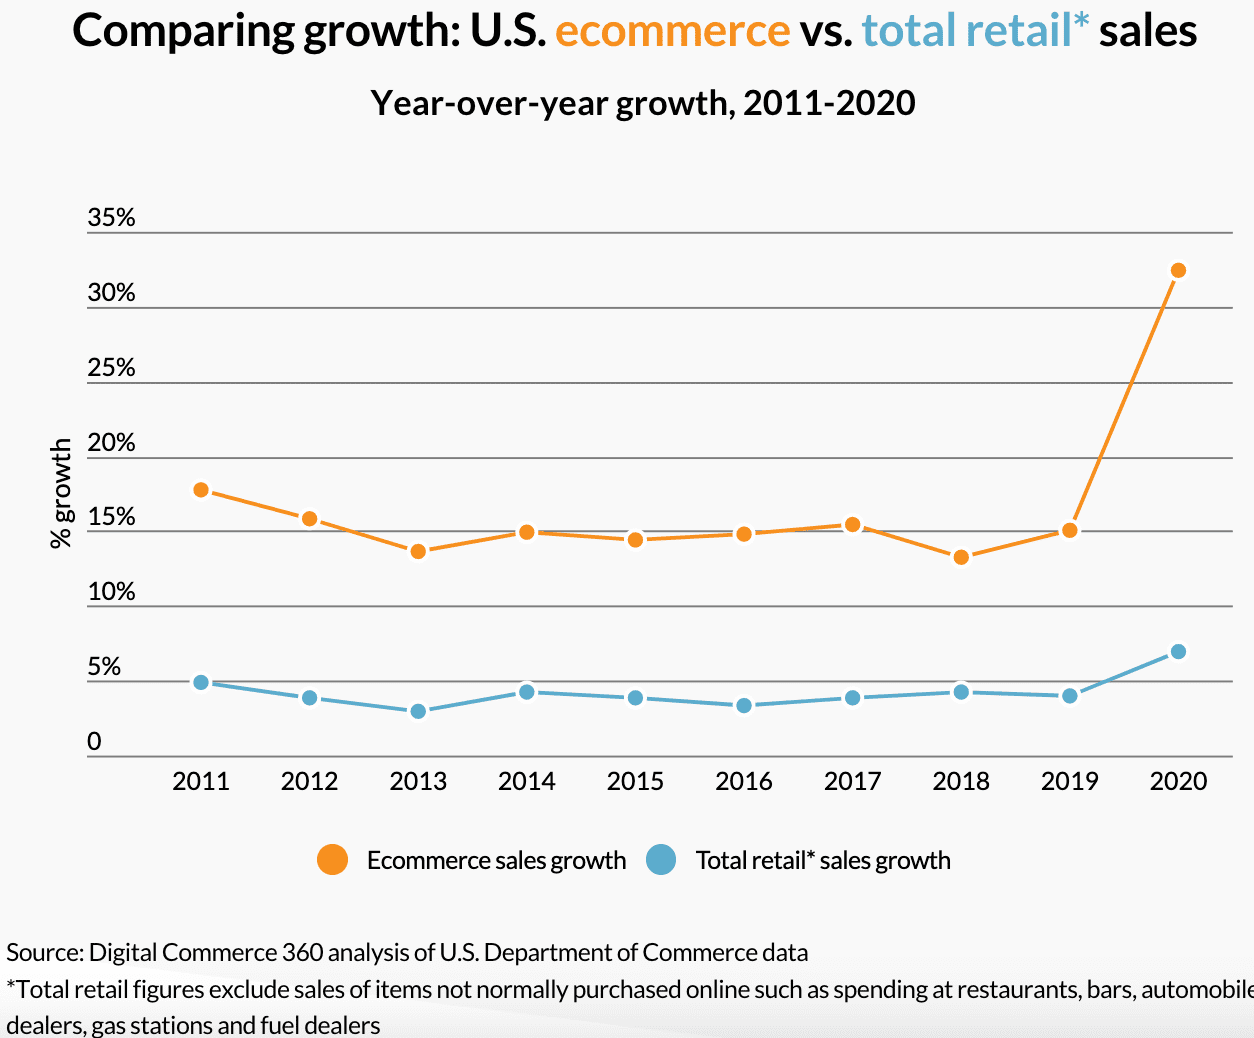 eCommerce sales growth in the USA